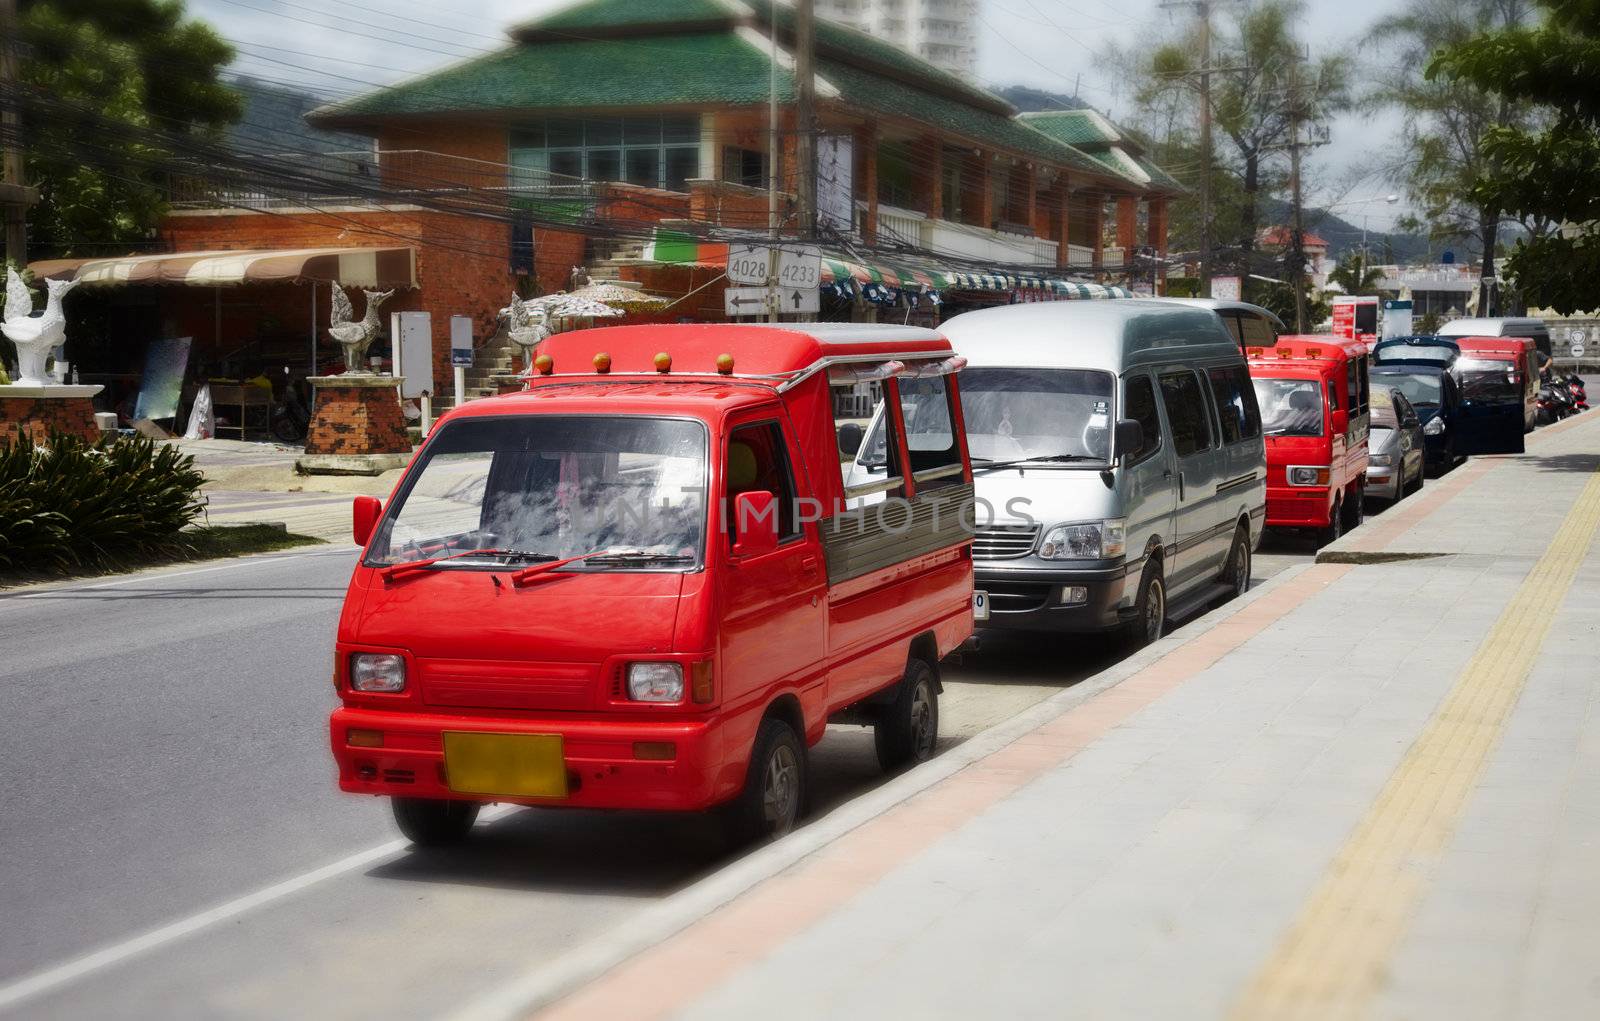 Small buses taxis in the resort town of Thailand